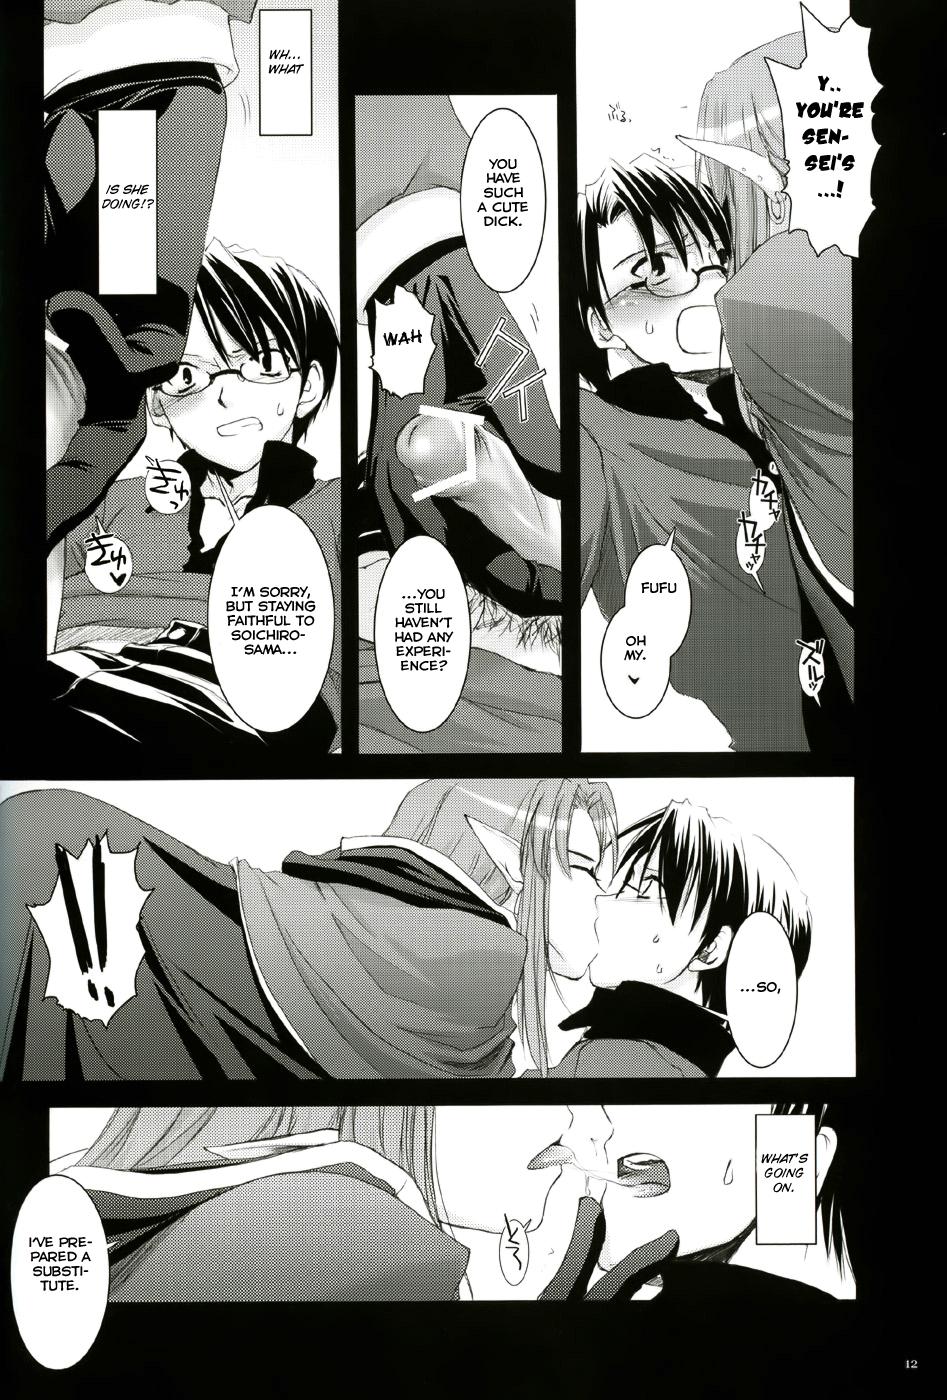 Sologirl D.L. action 27 - Fate stay night Point Of View - Page 11